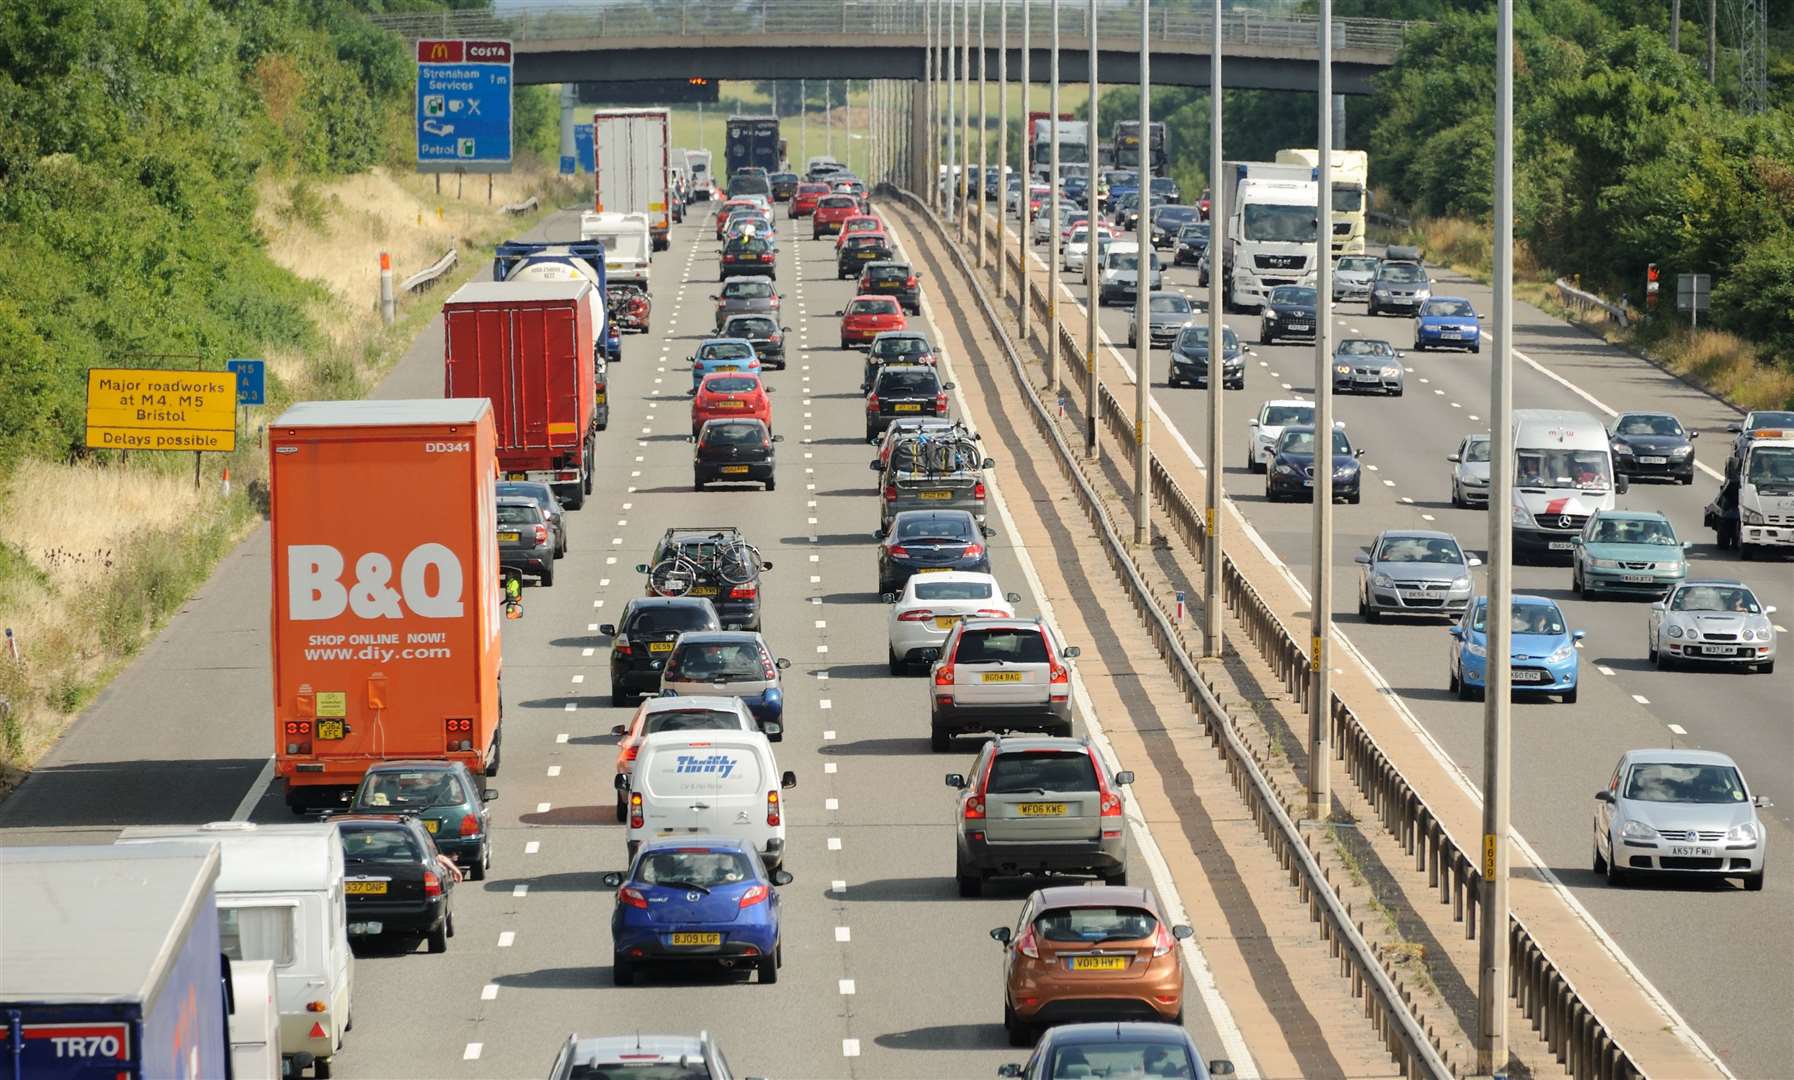 Drivers are being warned to expect delays. Image: iStock.